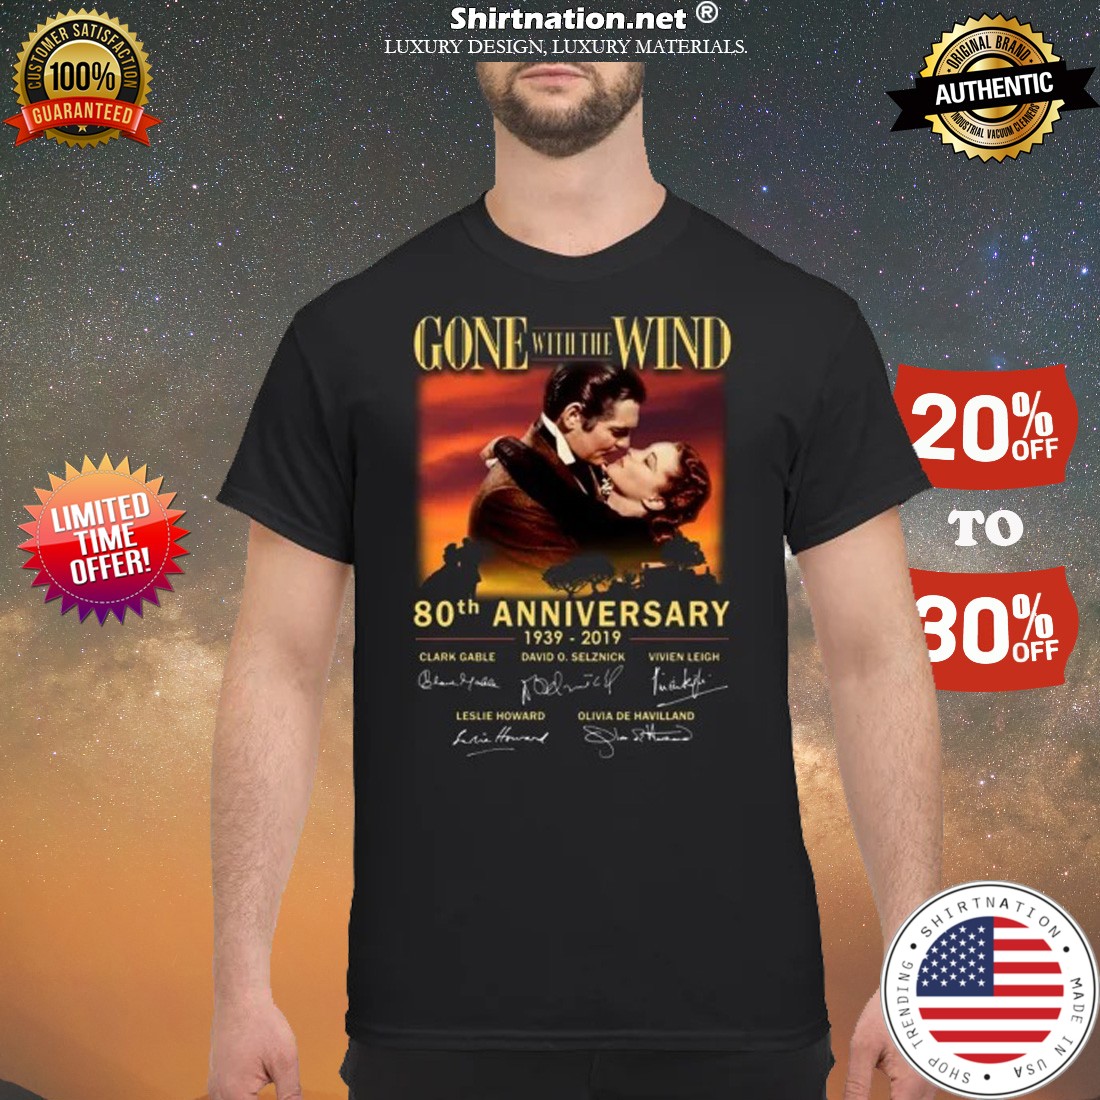 Gone of the wind 80th anniversary 1939 2019 shirt